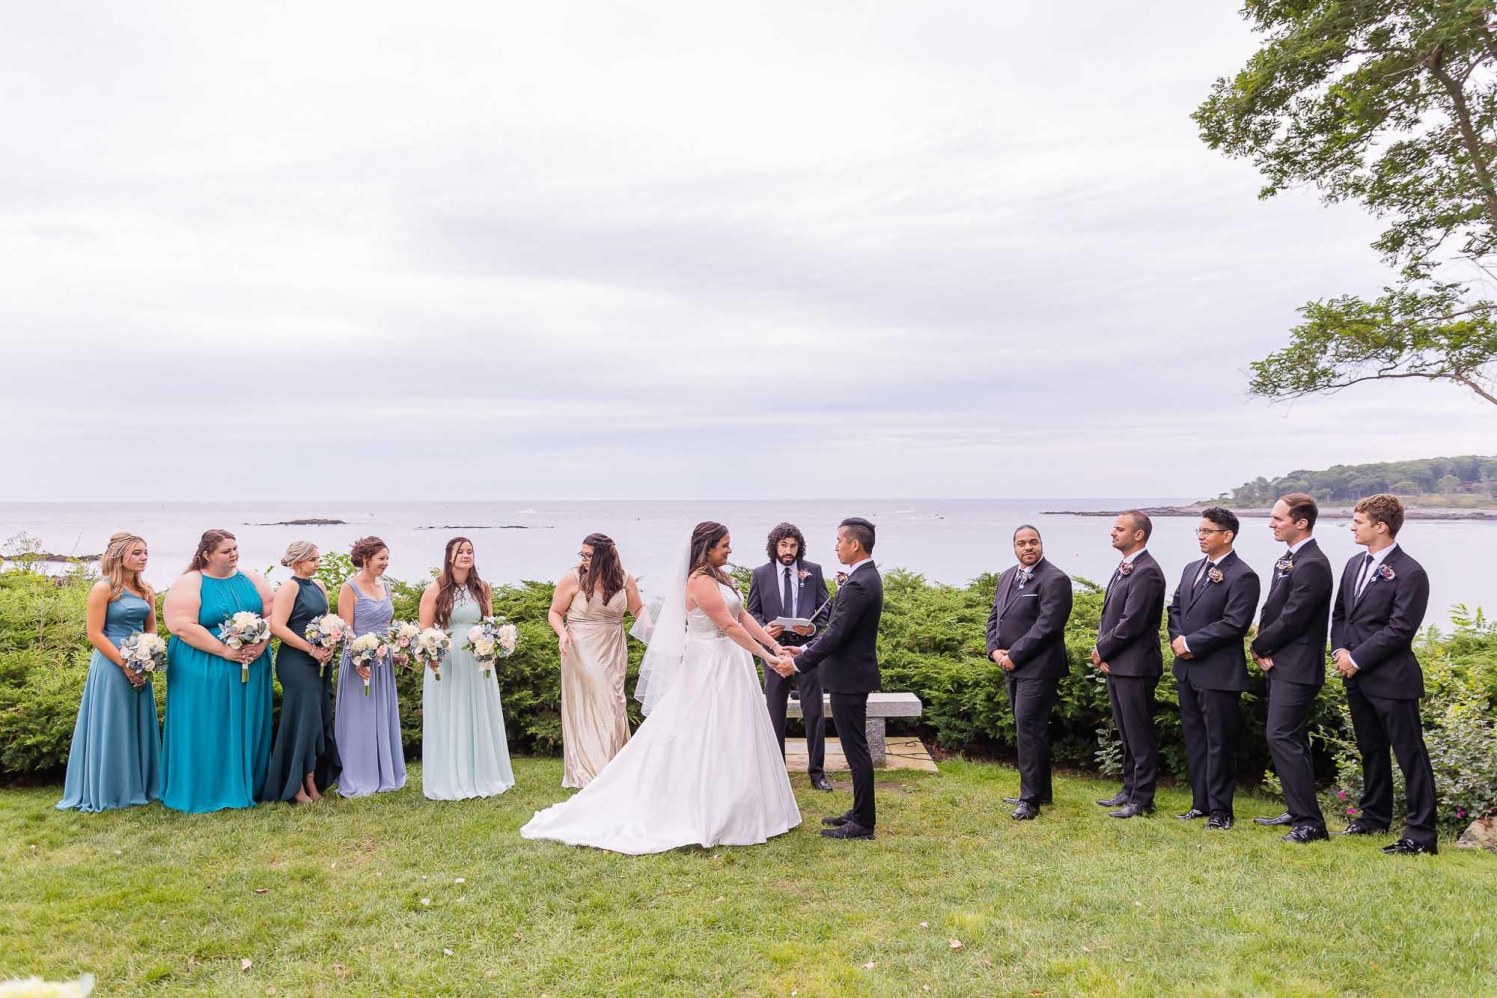 Intimate outdoor wedding ceremony at the York Harbor Inn